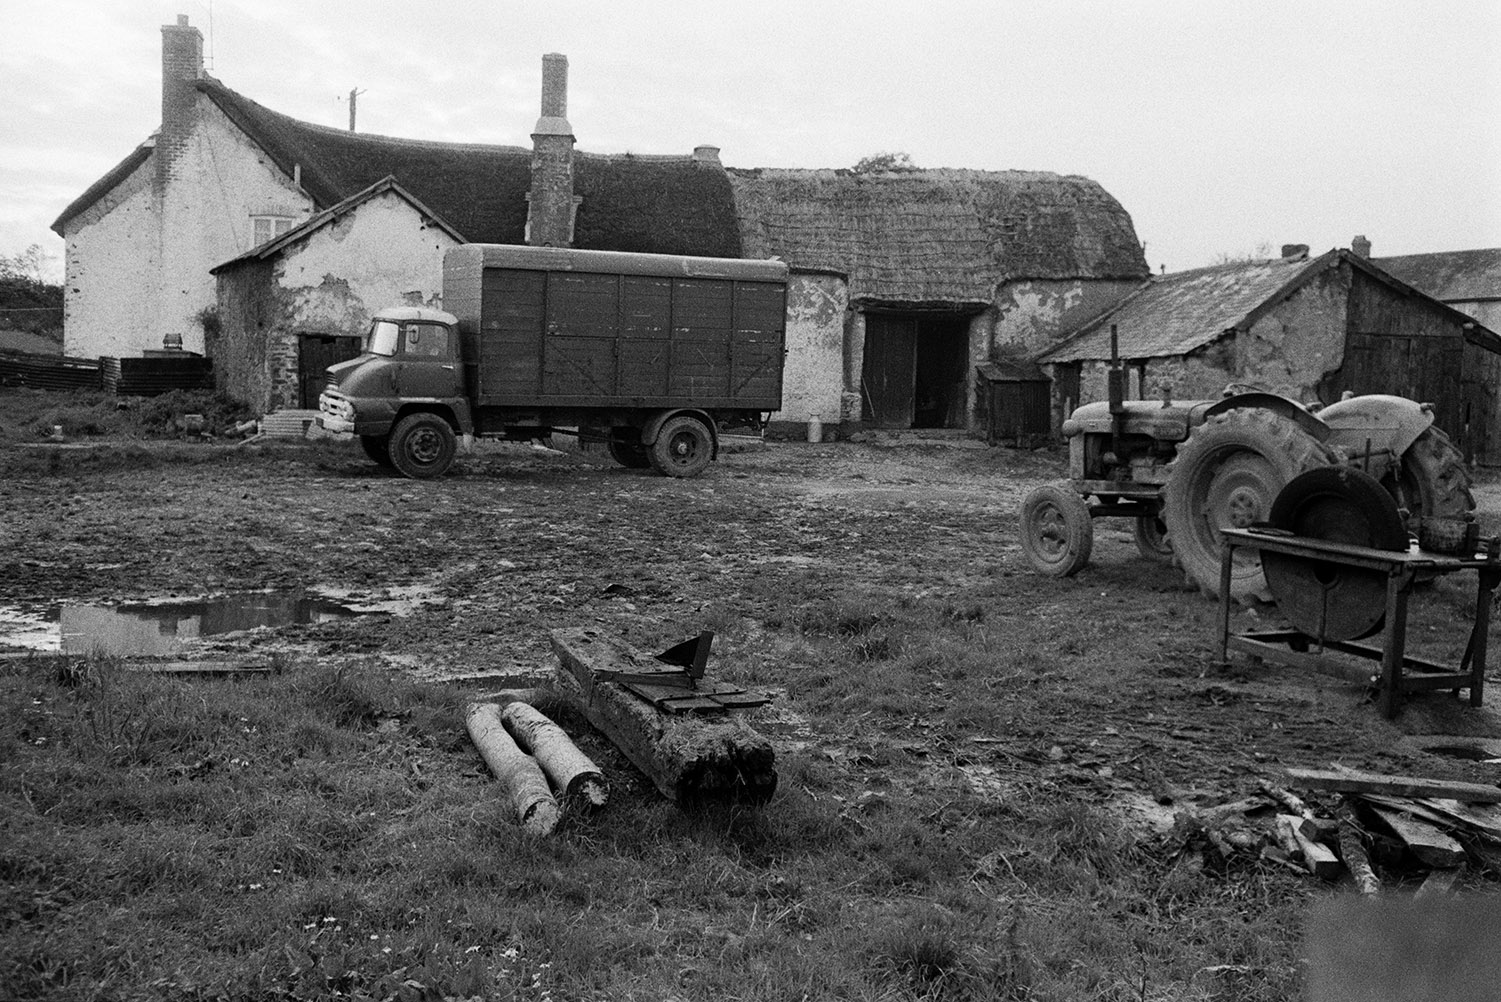 A farmyard with a tractor, circular saw, barns and a small lorry, in Atherington. The thatched farmhouse can be seen in the background.